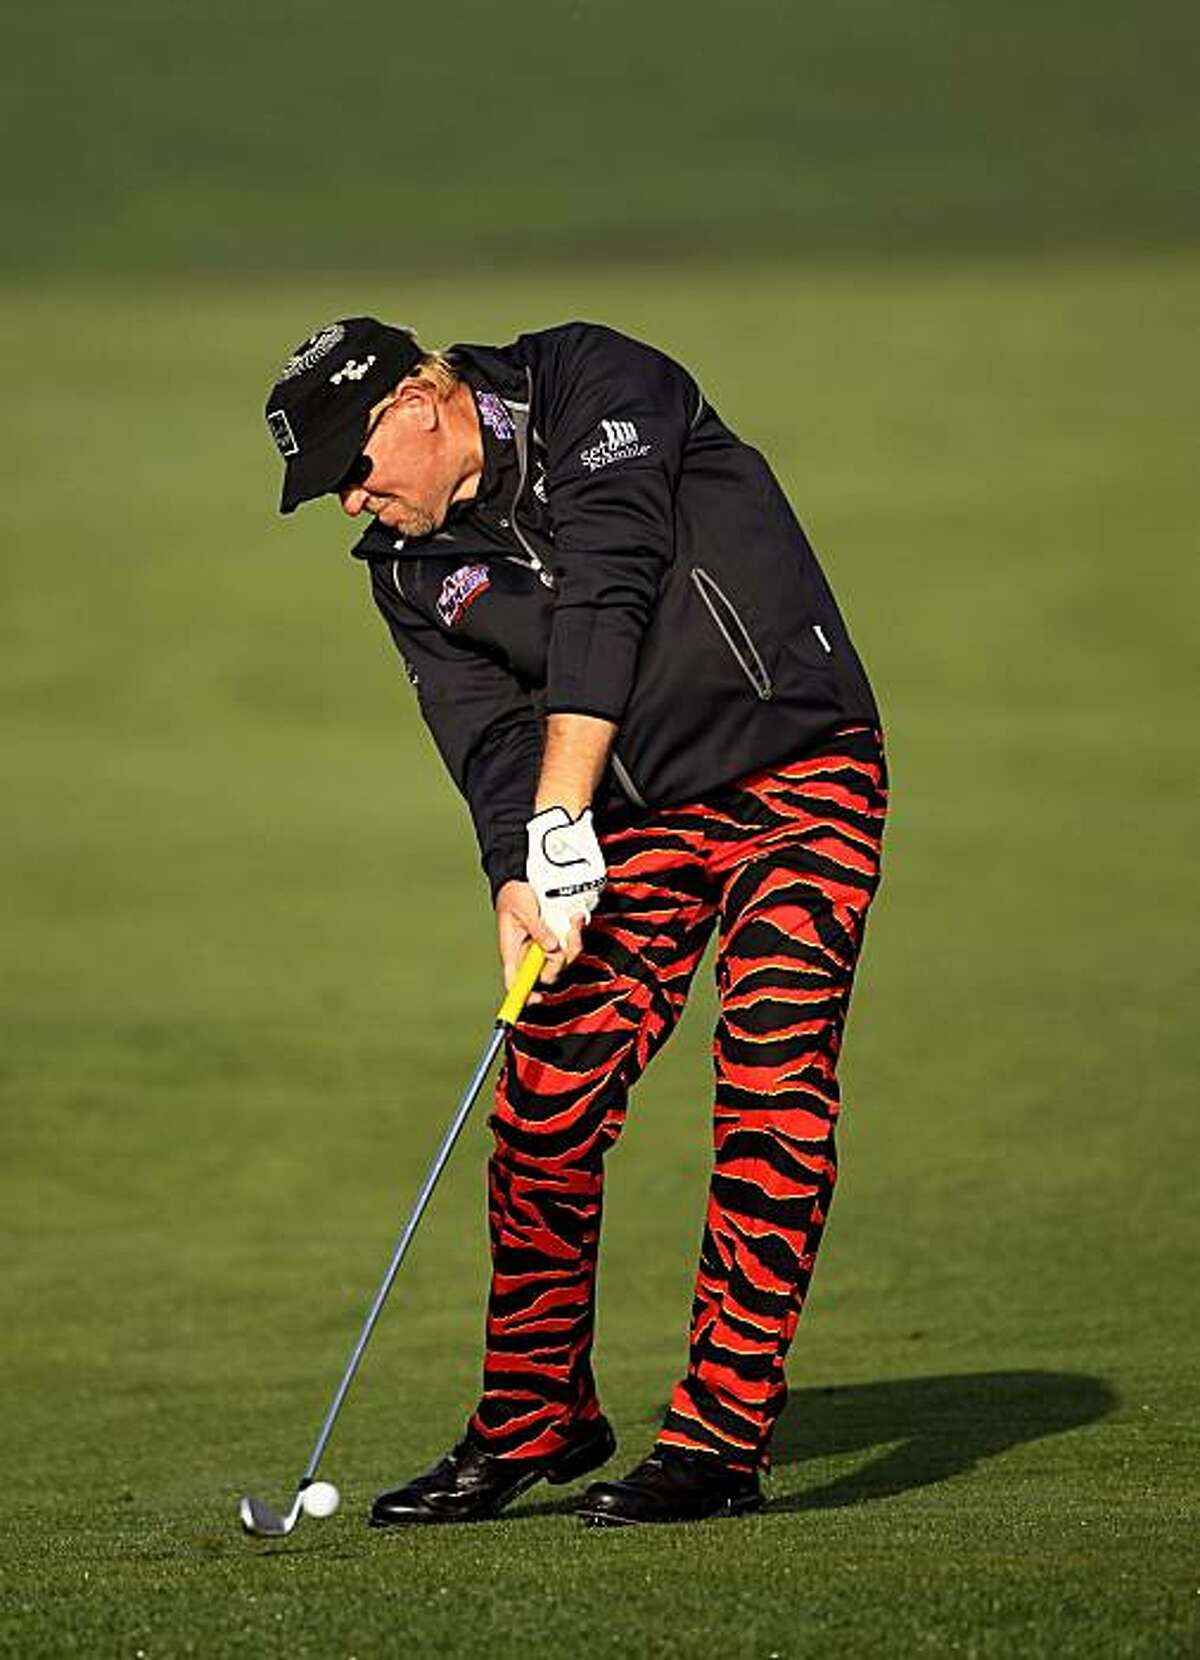 PEBBLE BEACH, CA - FEBRUARY 13: John Daly hits his approach shot on the second hole during round three of the AT&T Pebble Beach National Pro-Am at Pebble Beach Golf Links on February 13, 2010 in Pebble Beach, California.